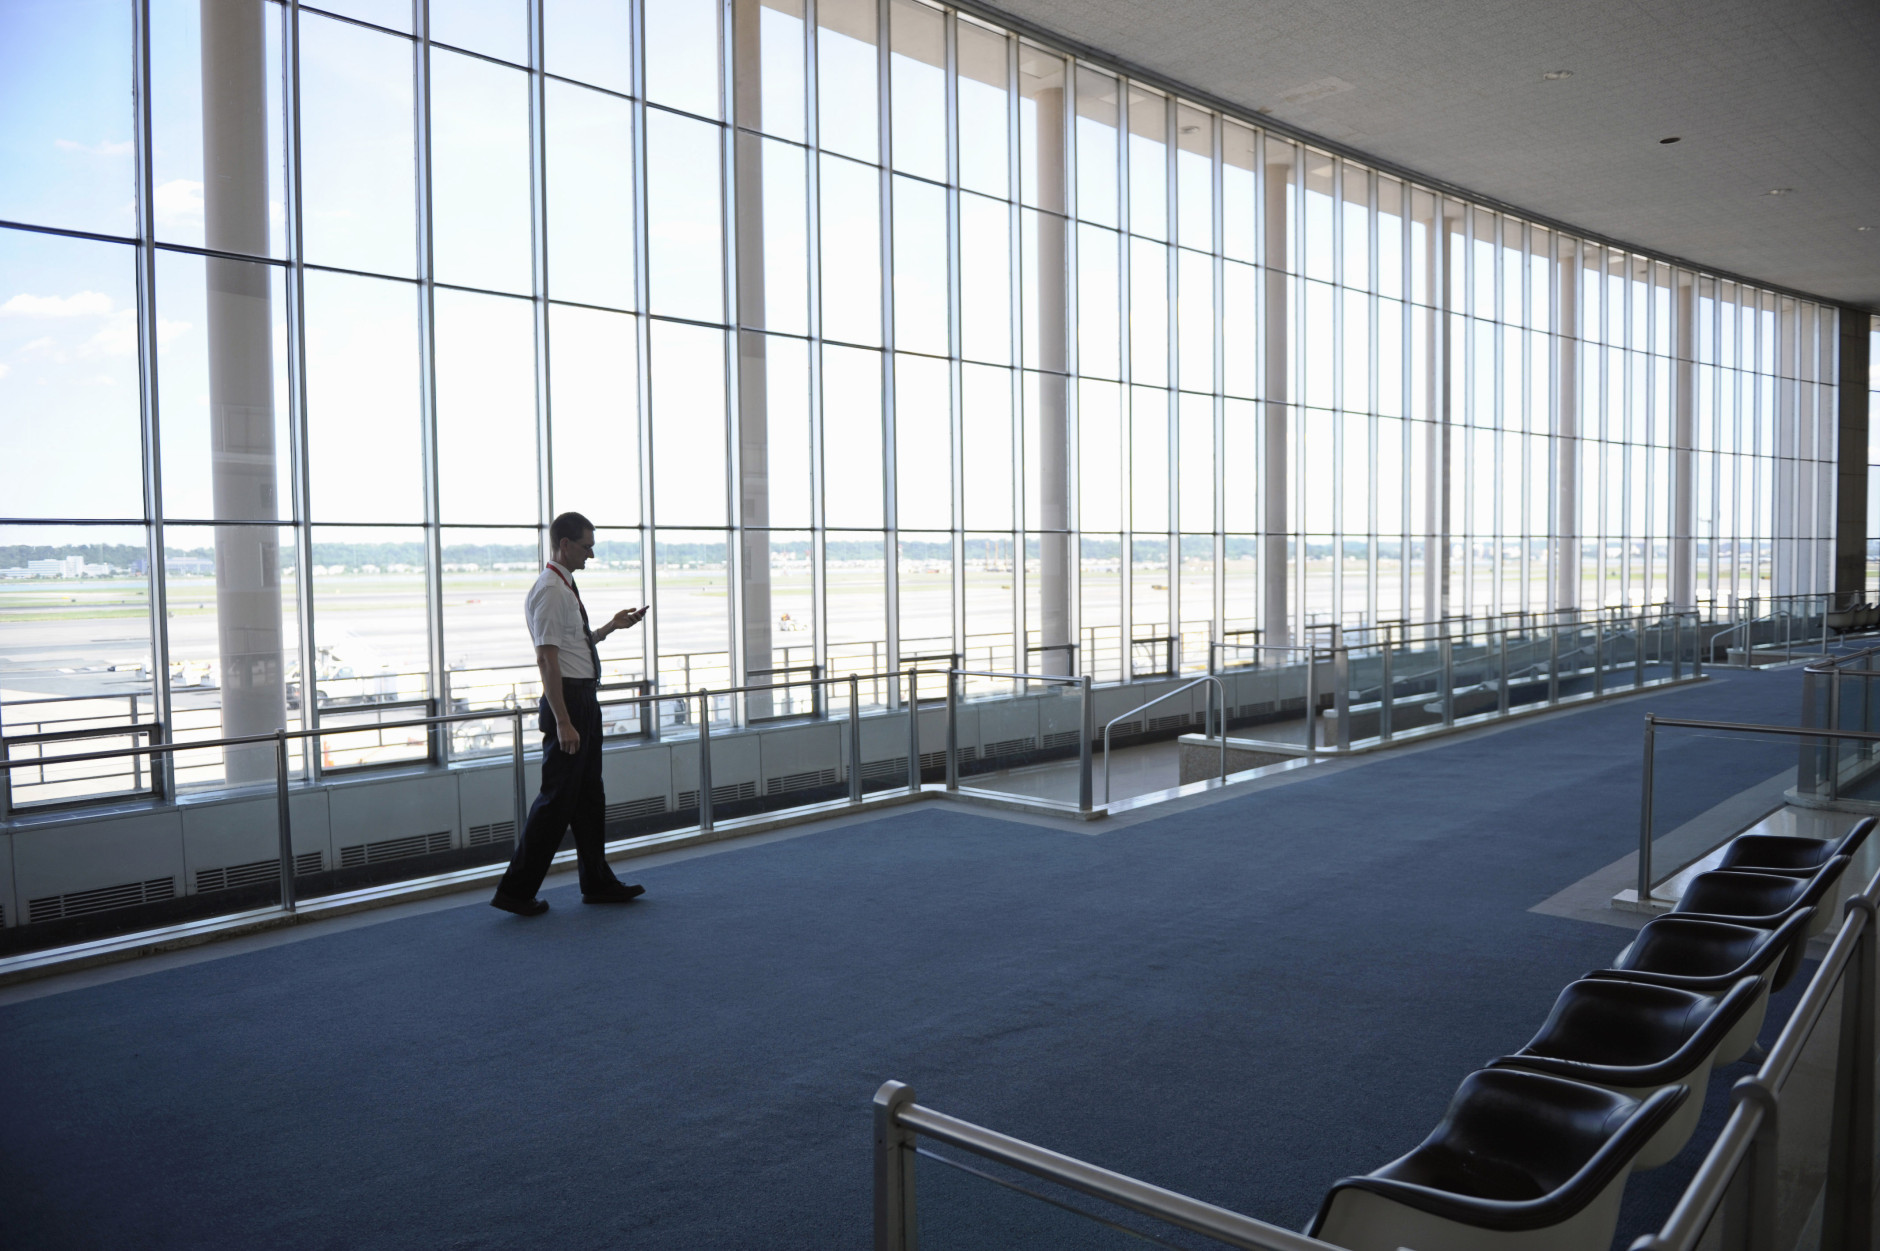 An employee of Washington's Ronald Reagan National Airport stands in an empty Terminal A, Tuesday, Aug. 23, 2011, after an earthquake in the Washington area. A 5.9 magnitude earthquake centered in Virginia forced evacuations of all the monuments on the National Mall in Washington and rattled nerves from Georgia to Martha's Vineyard, the Massachusetts island where President Barack Obama is vacationing. No injuries were immediately reported.  (AP Photo/Cliff Owen)